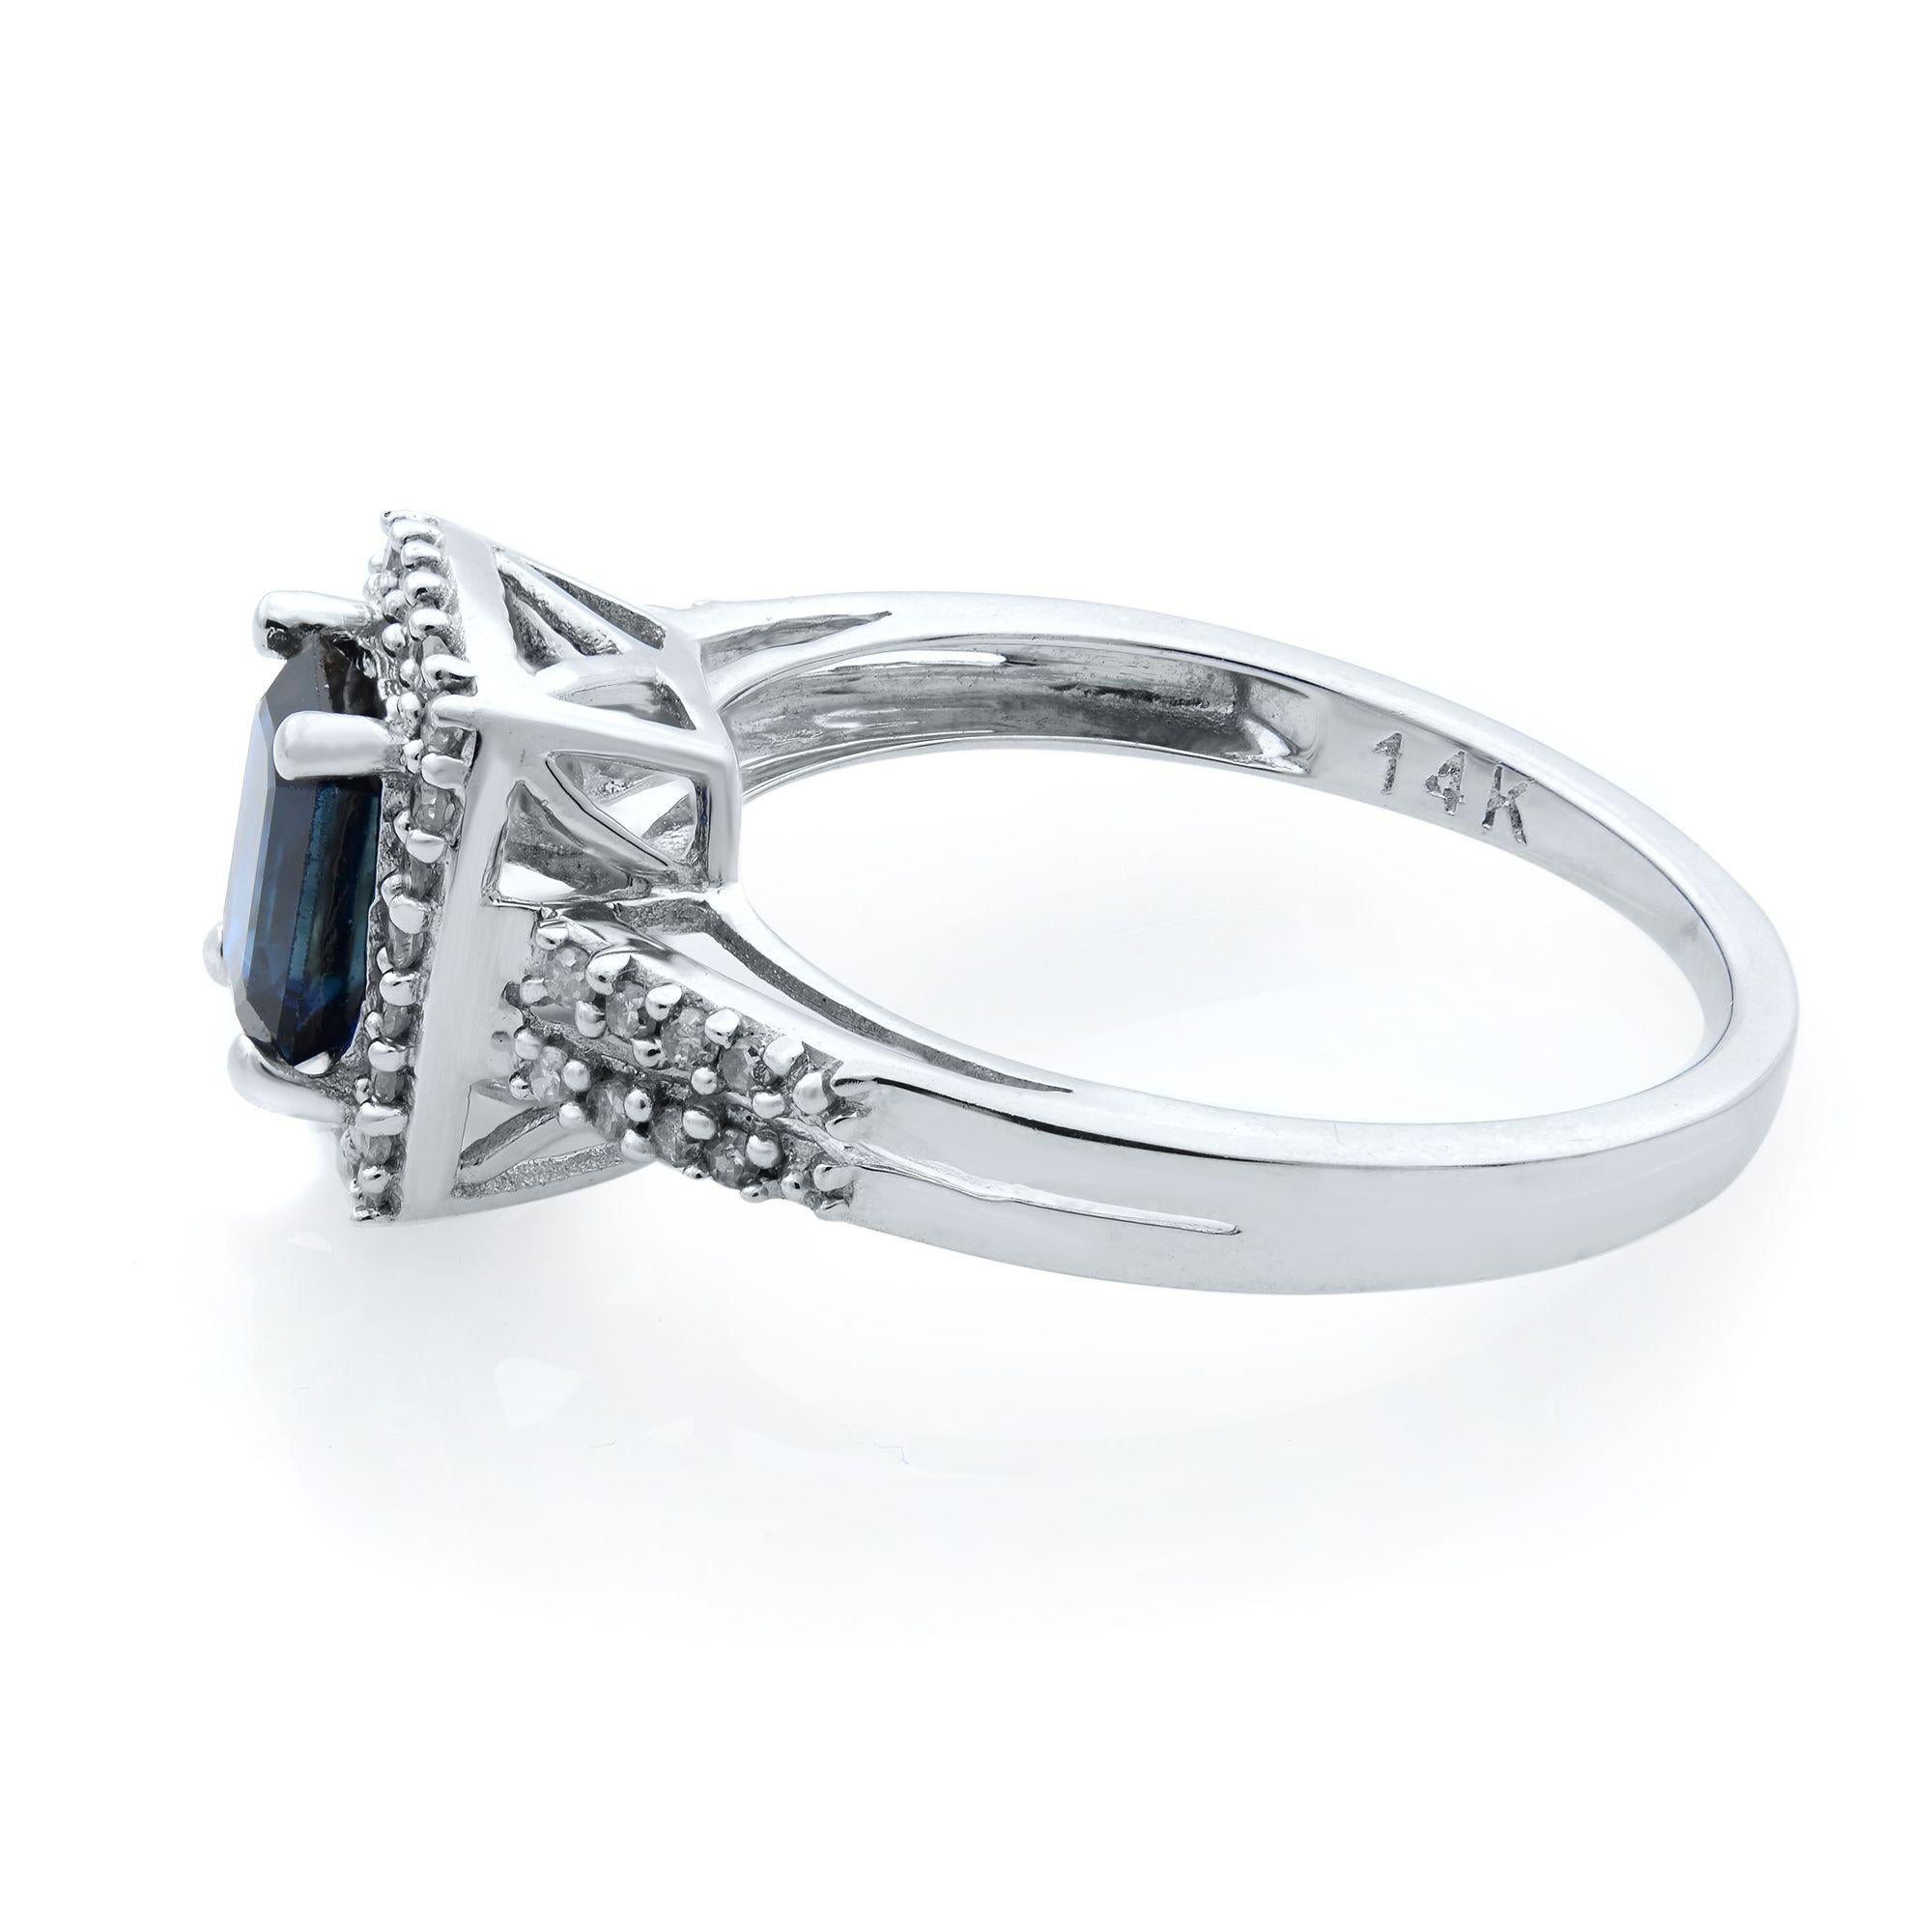 This beautiful Blue Sapphire Emerald cut engagement ring is crafted in 14k white gold. Set with 0.75cts Blue Sapphire and white round cut accent diamonds with a total of 0.25cts. Ring size 7. Comes with a presentable gift box. 